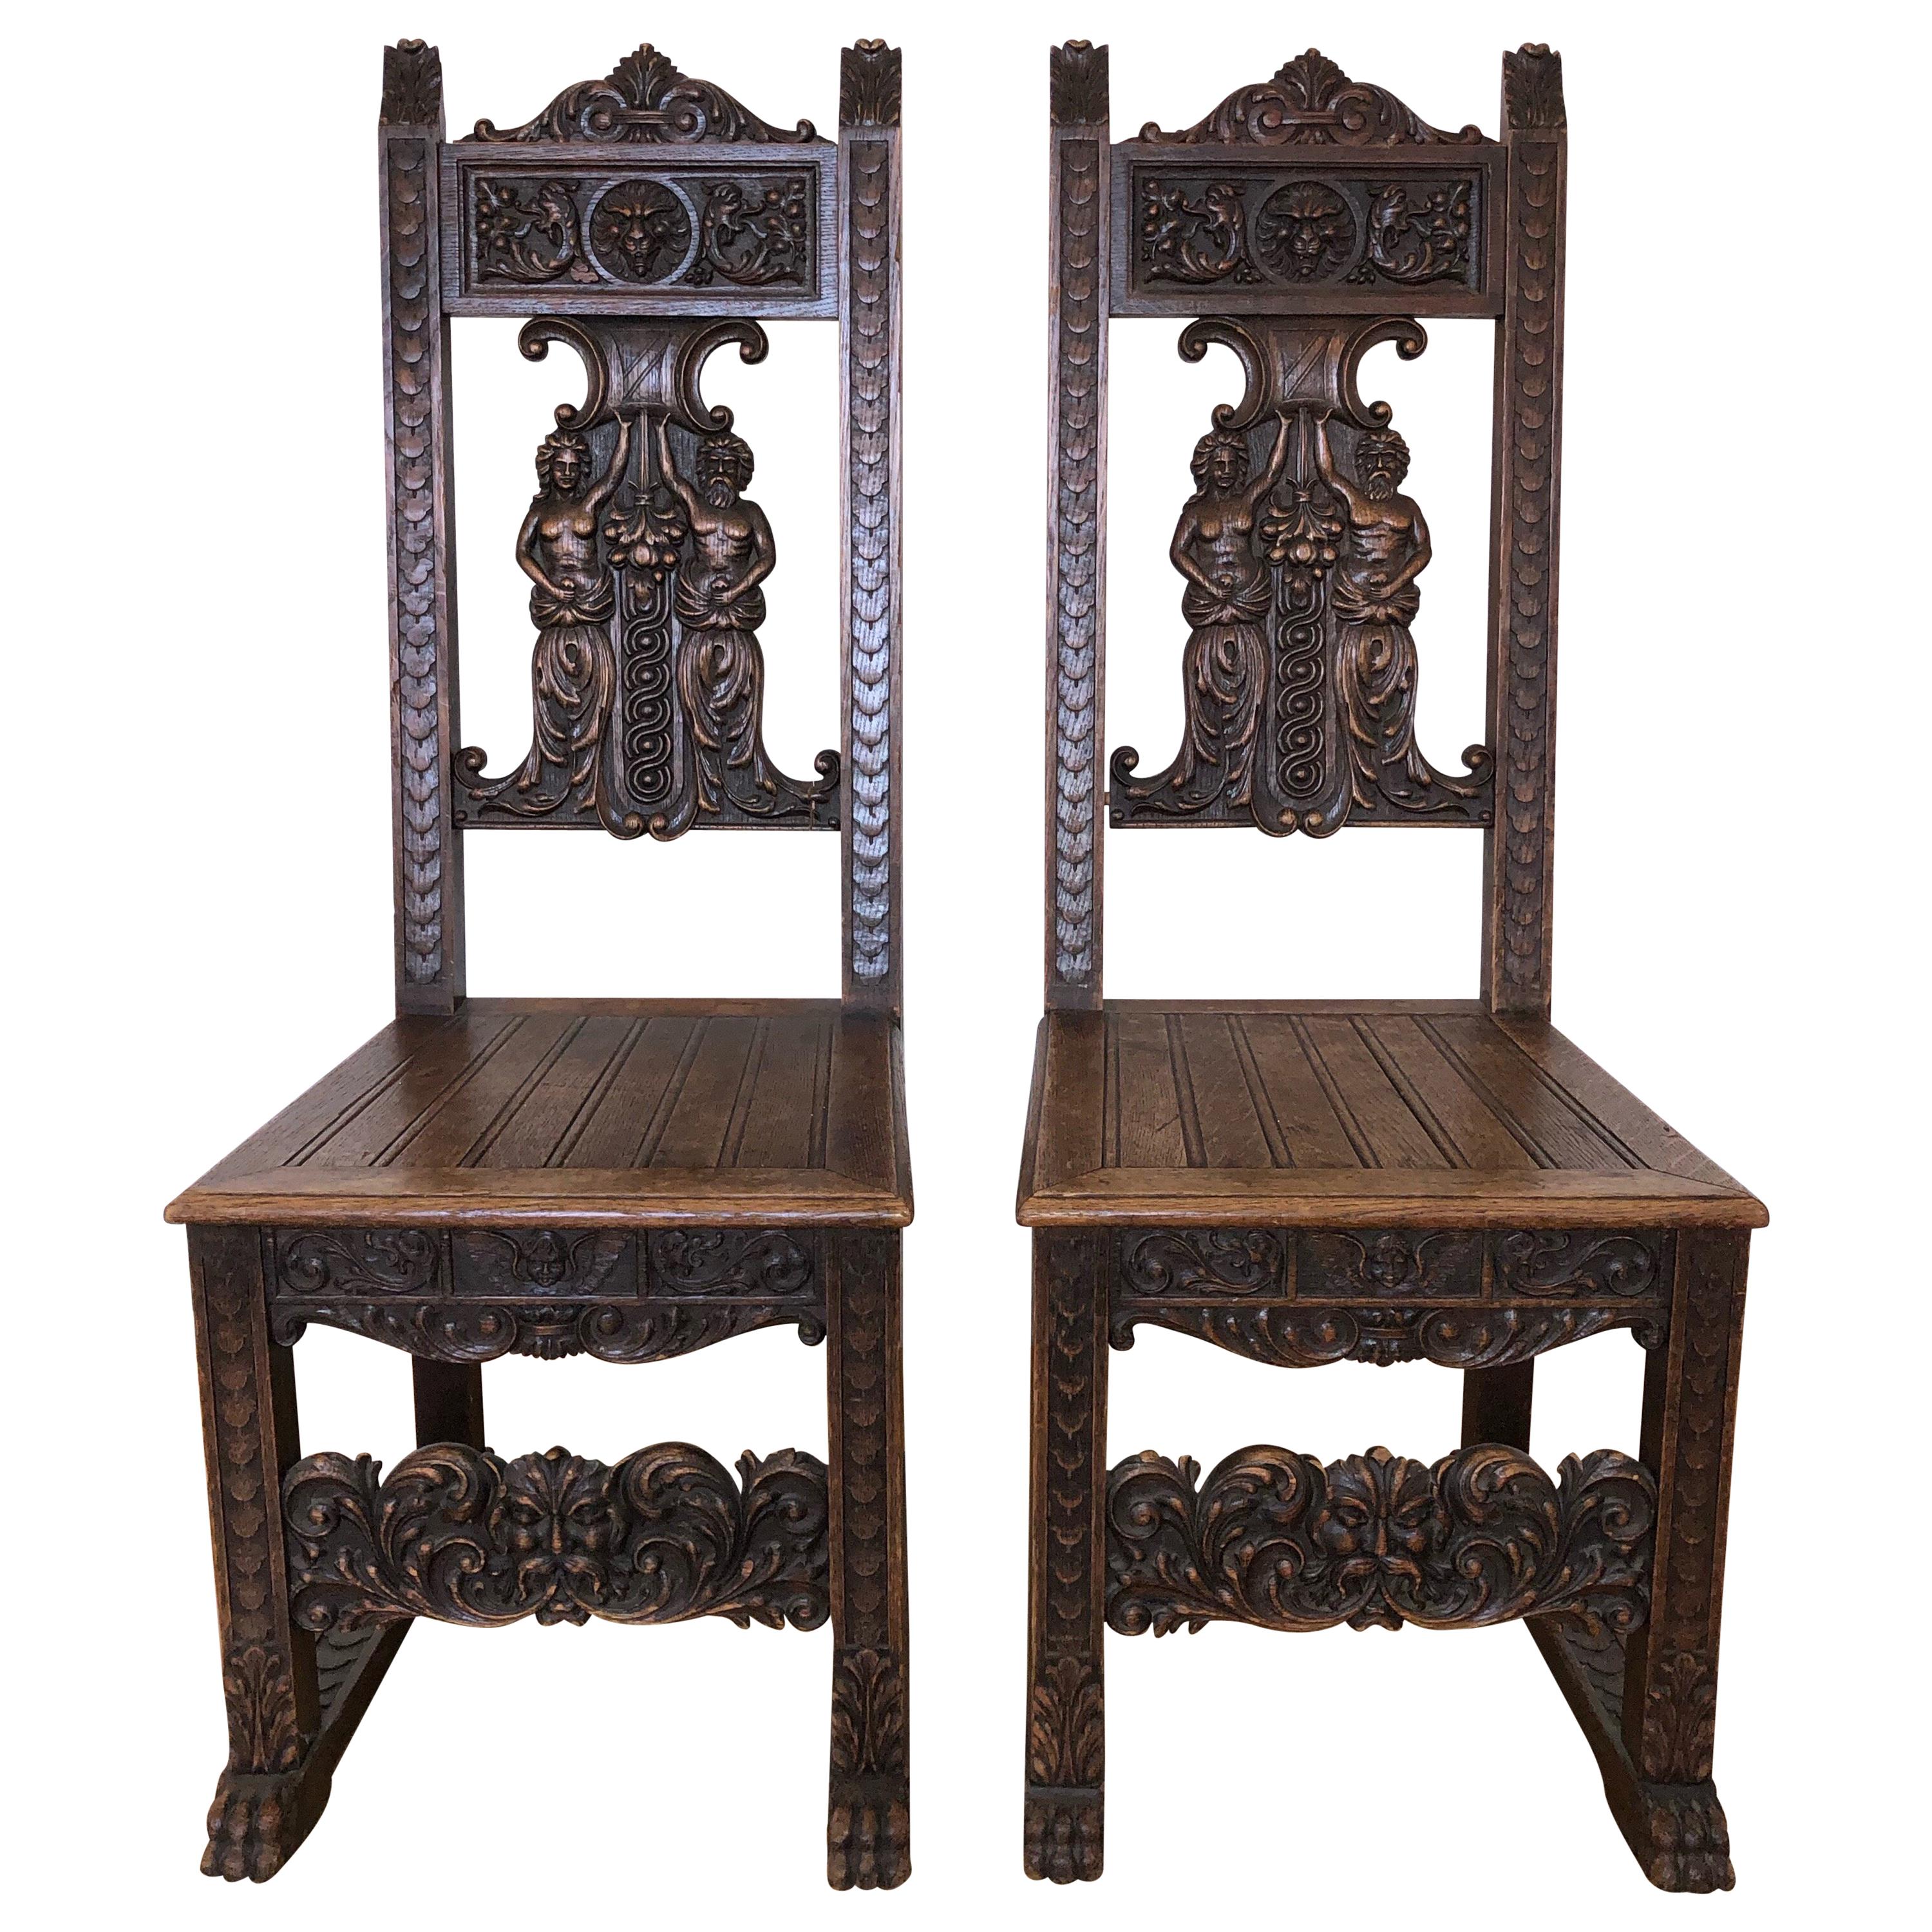 SALE Pair of Rustic Carved Wood Renaissance Style Italian Side Chairs